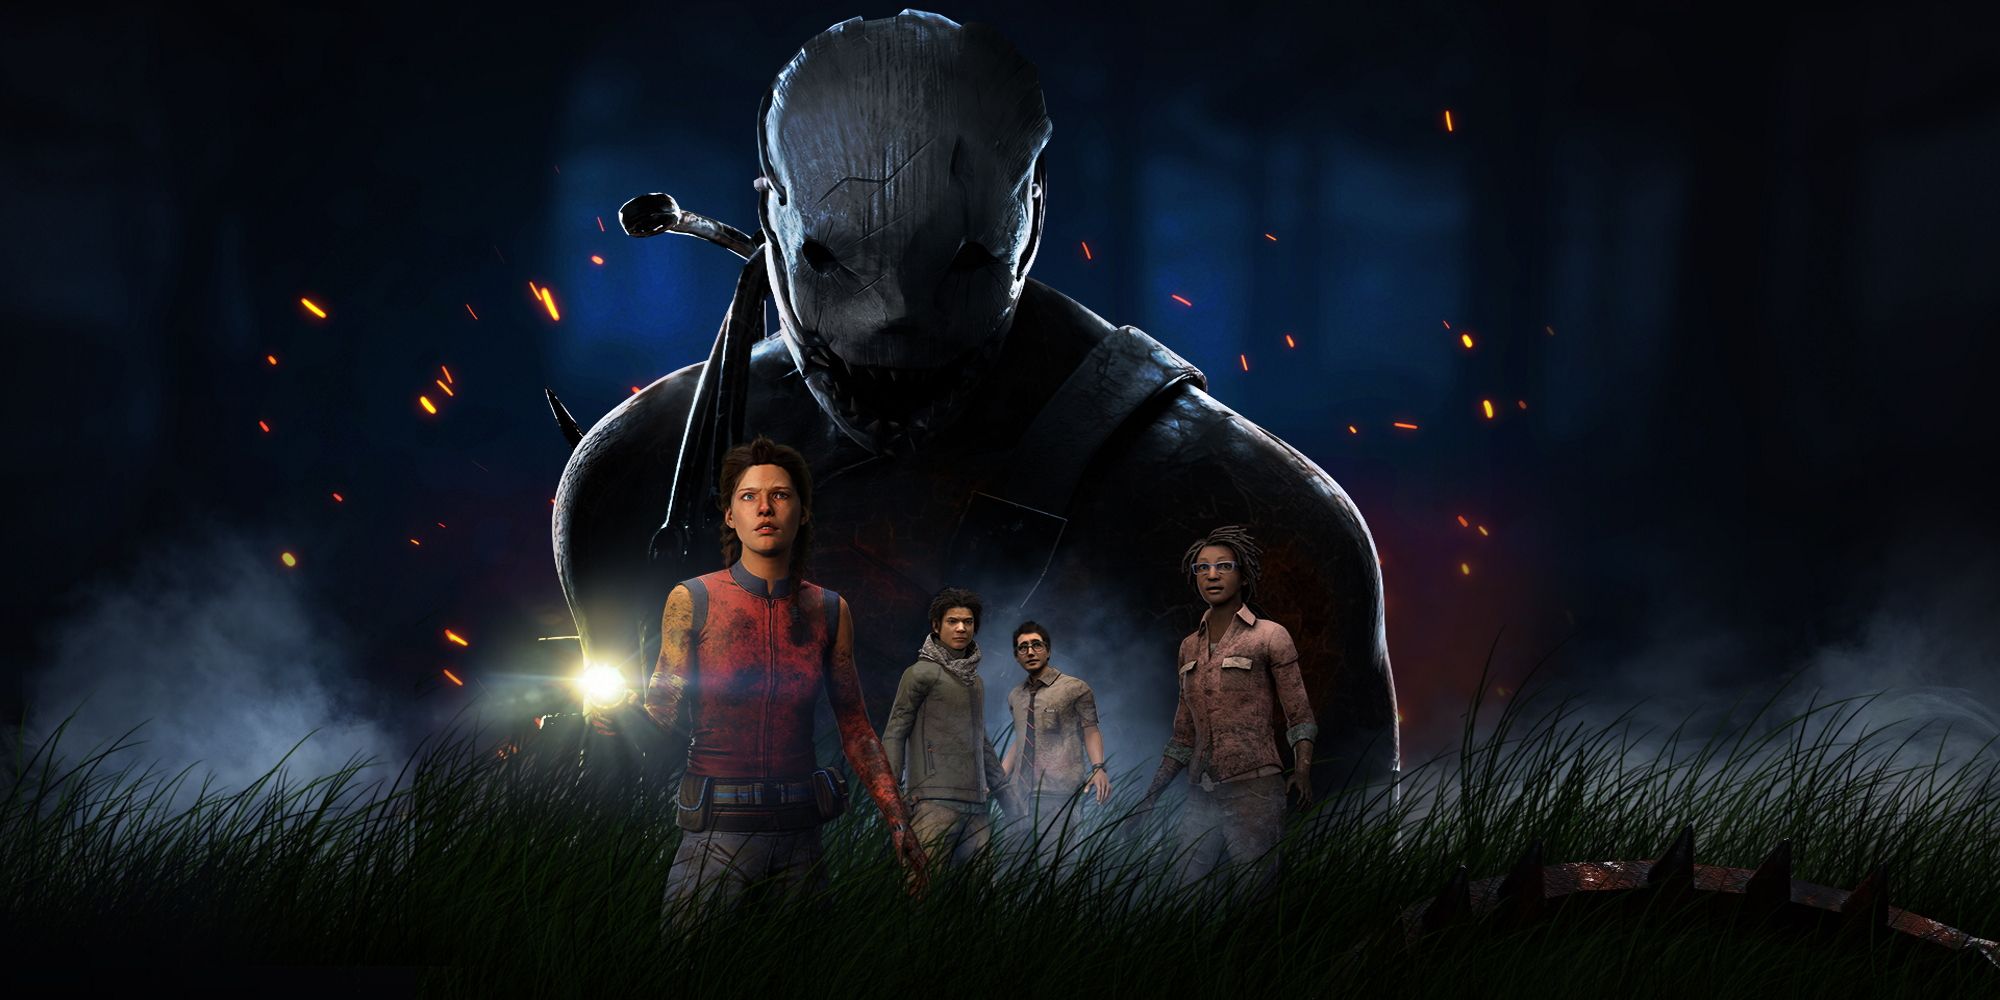 Dead by Daylight Mobile - The Killer And Four Survivors In A Dark And Spooky Forest